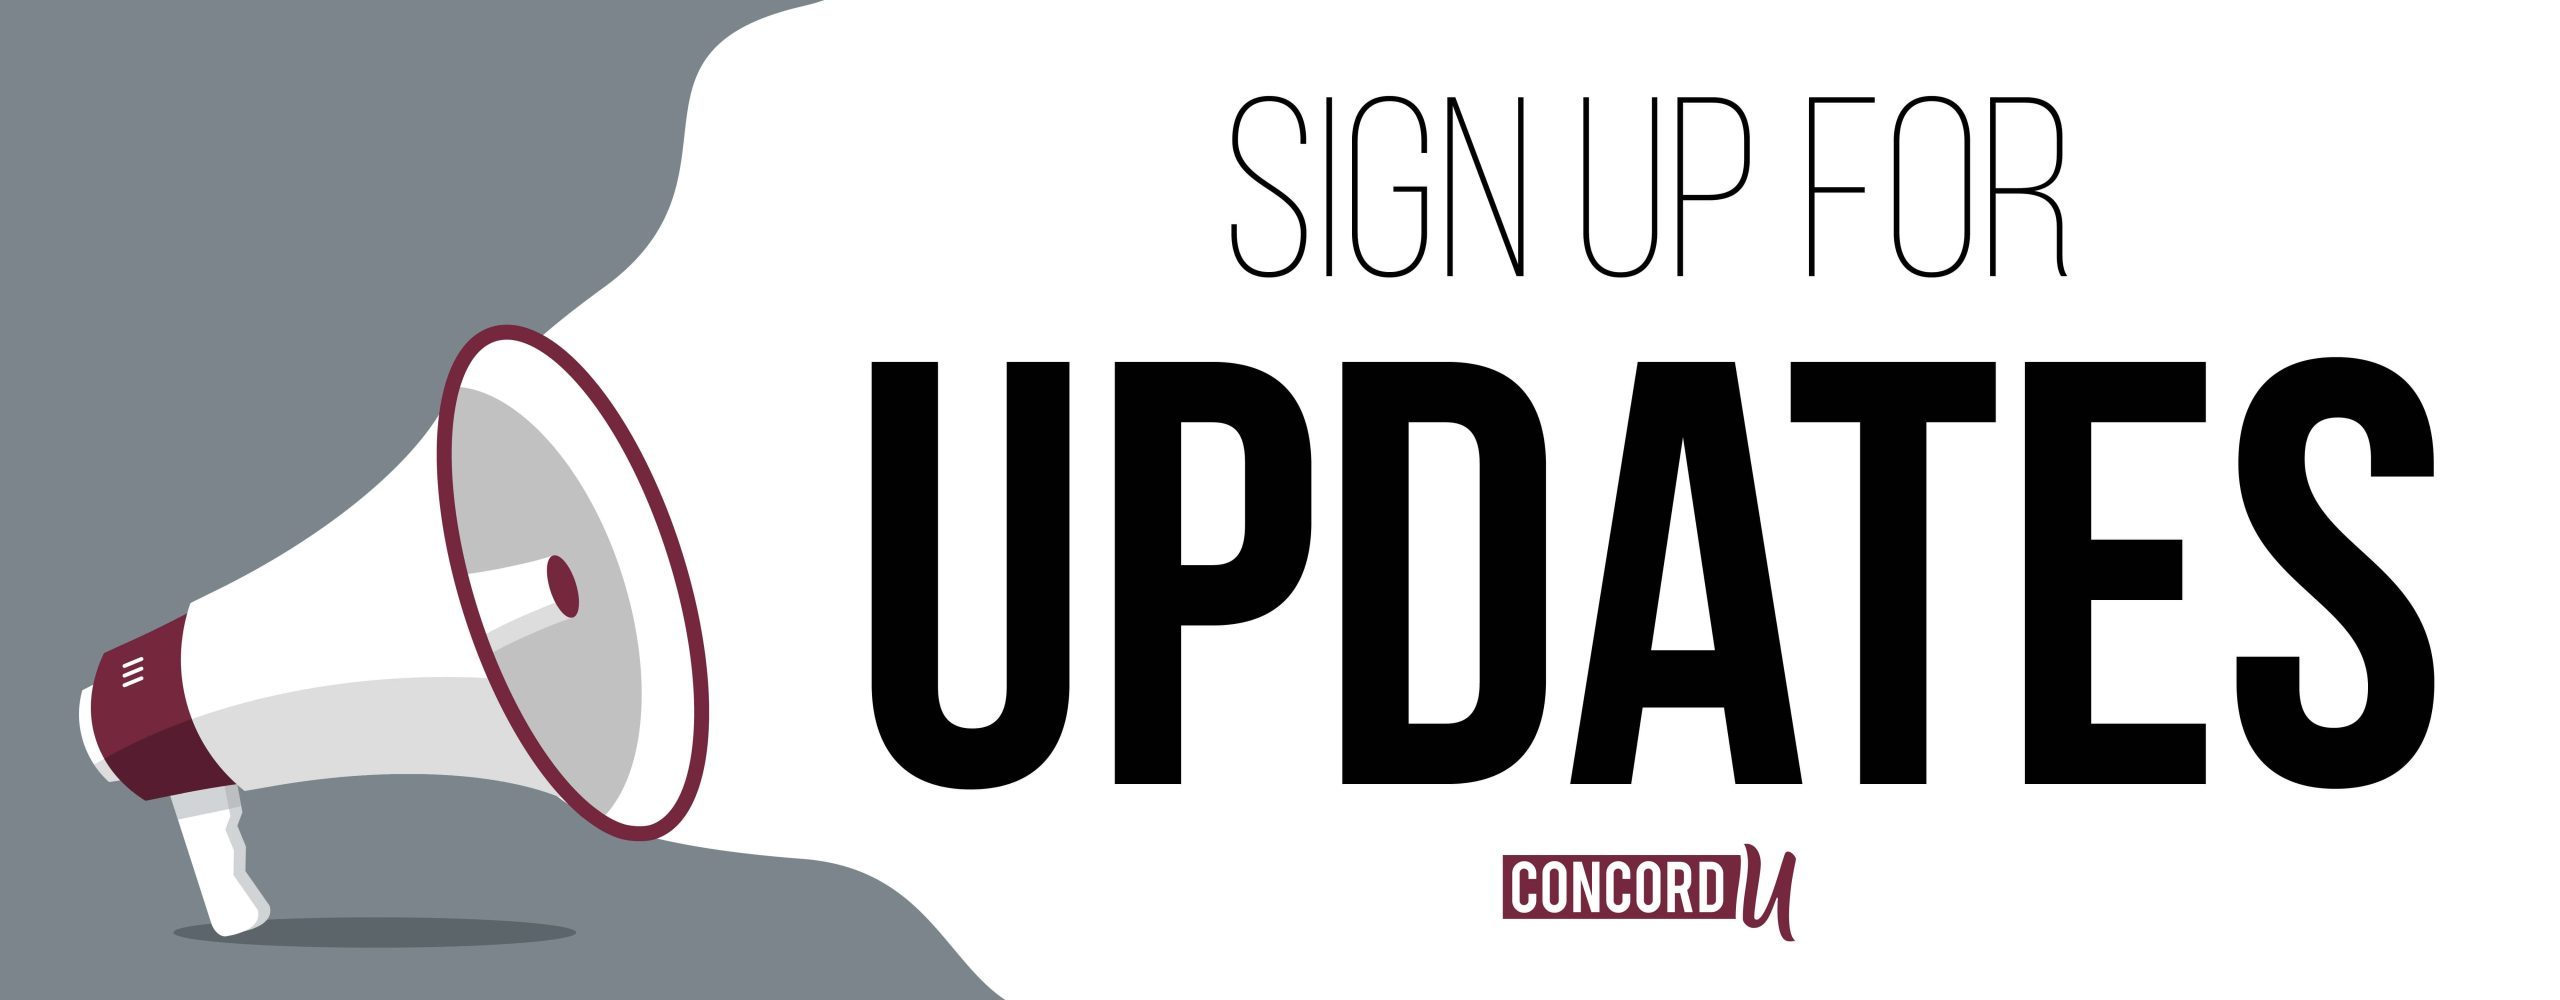 Sign up for updates about dual credit!